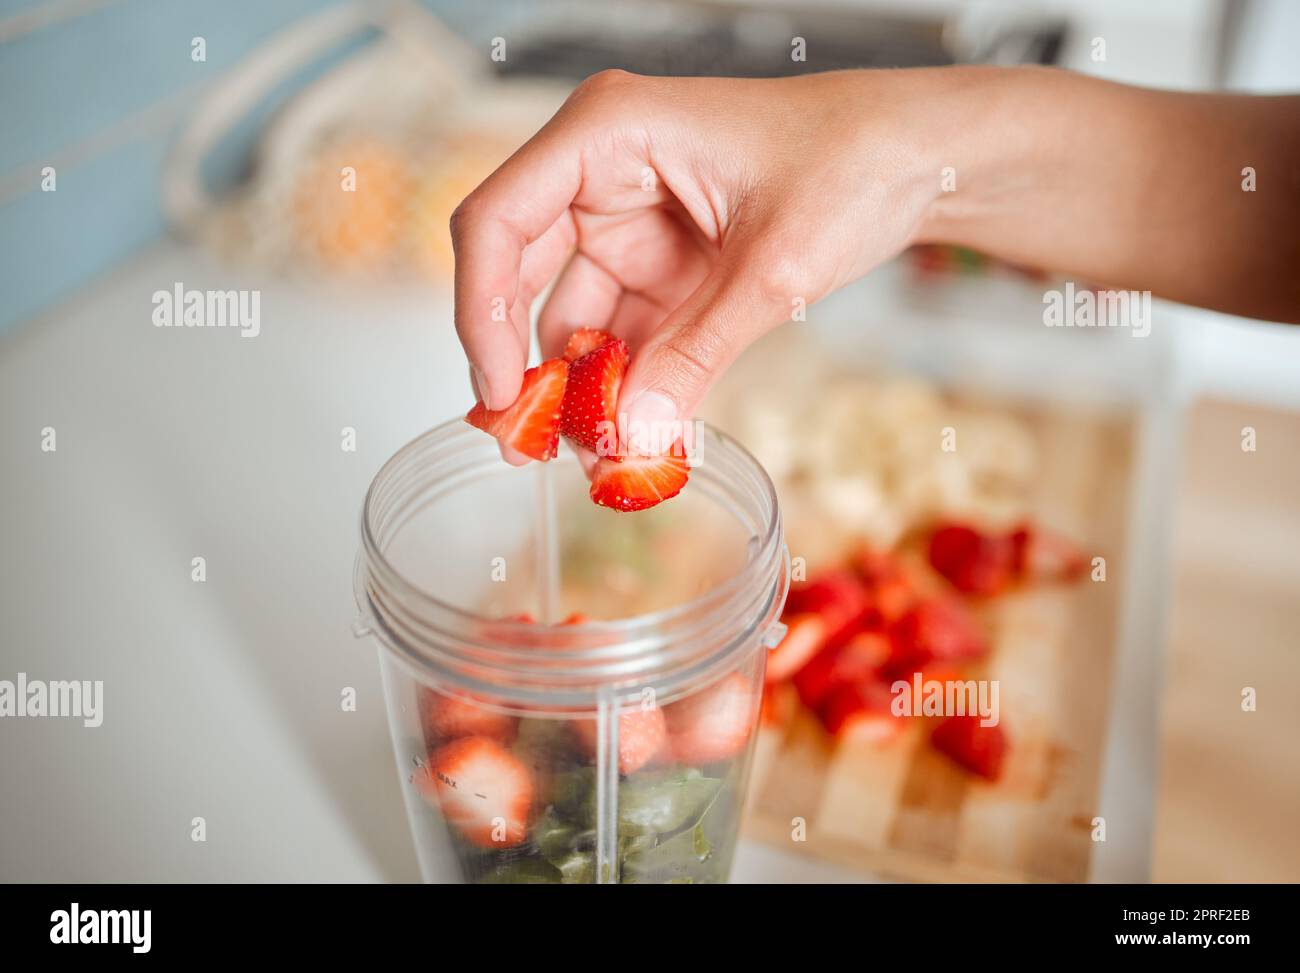 Healthy, diet and fruits while preparing a smoothie or shake in a blender at home. Making a fresh homemade organic drink with strawberries to cleanse and provide energy for vitality and health Stock Photo